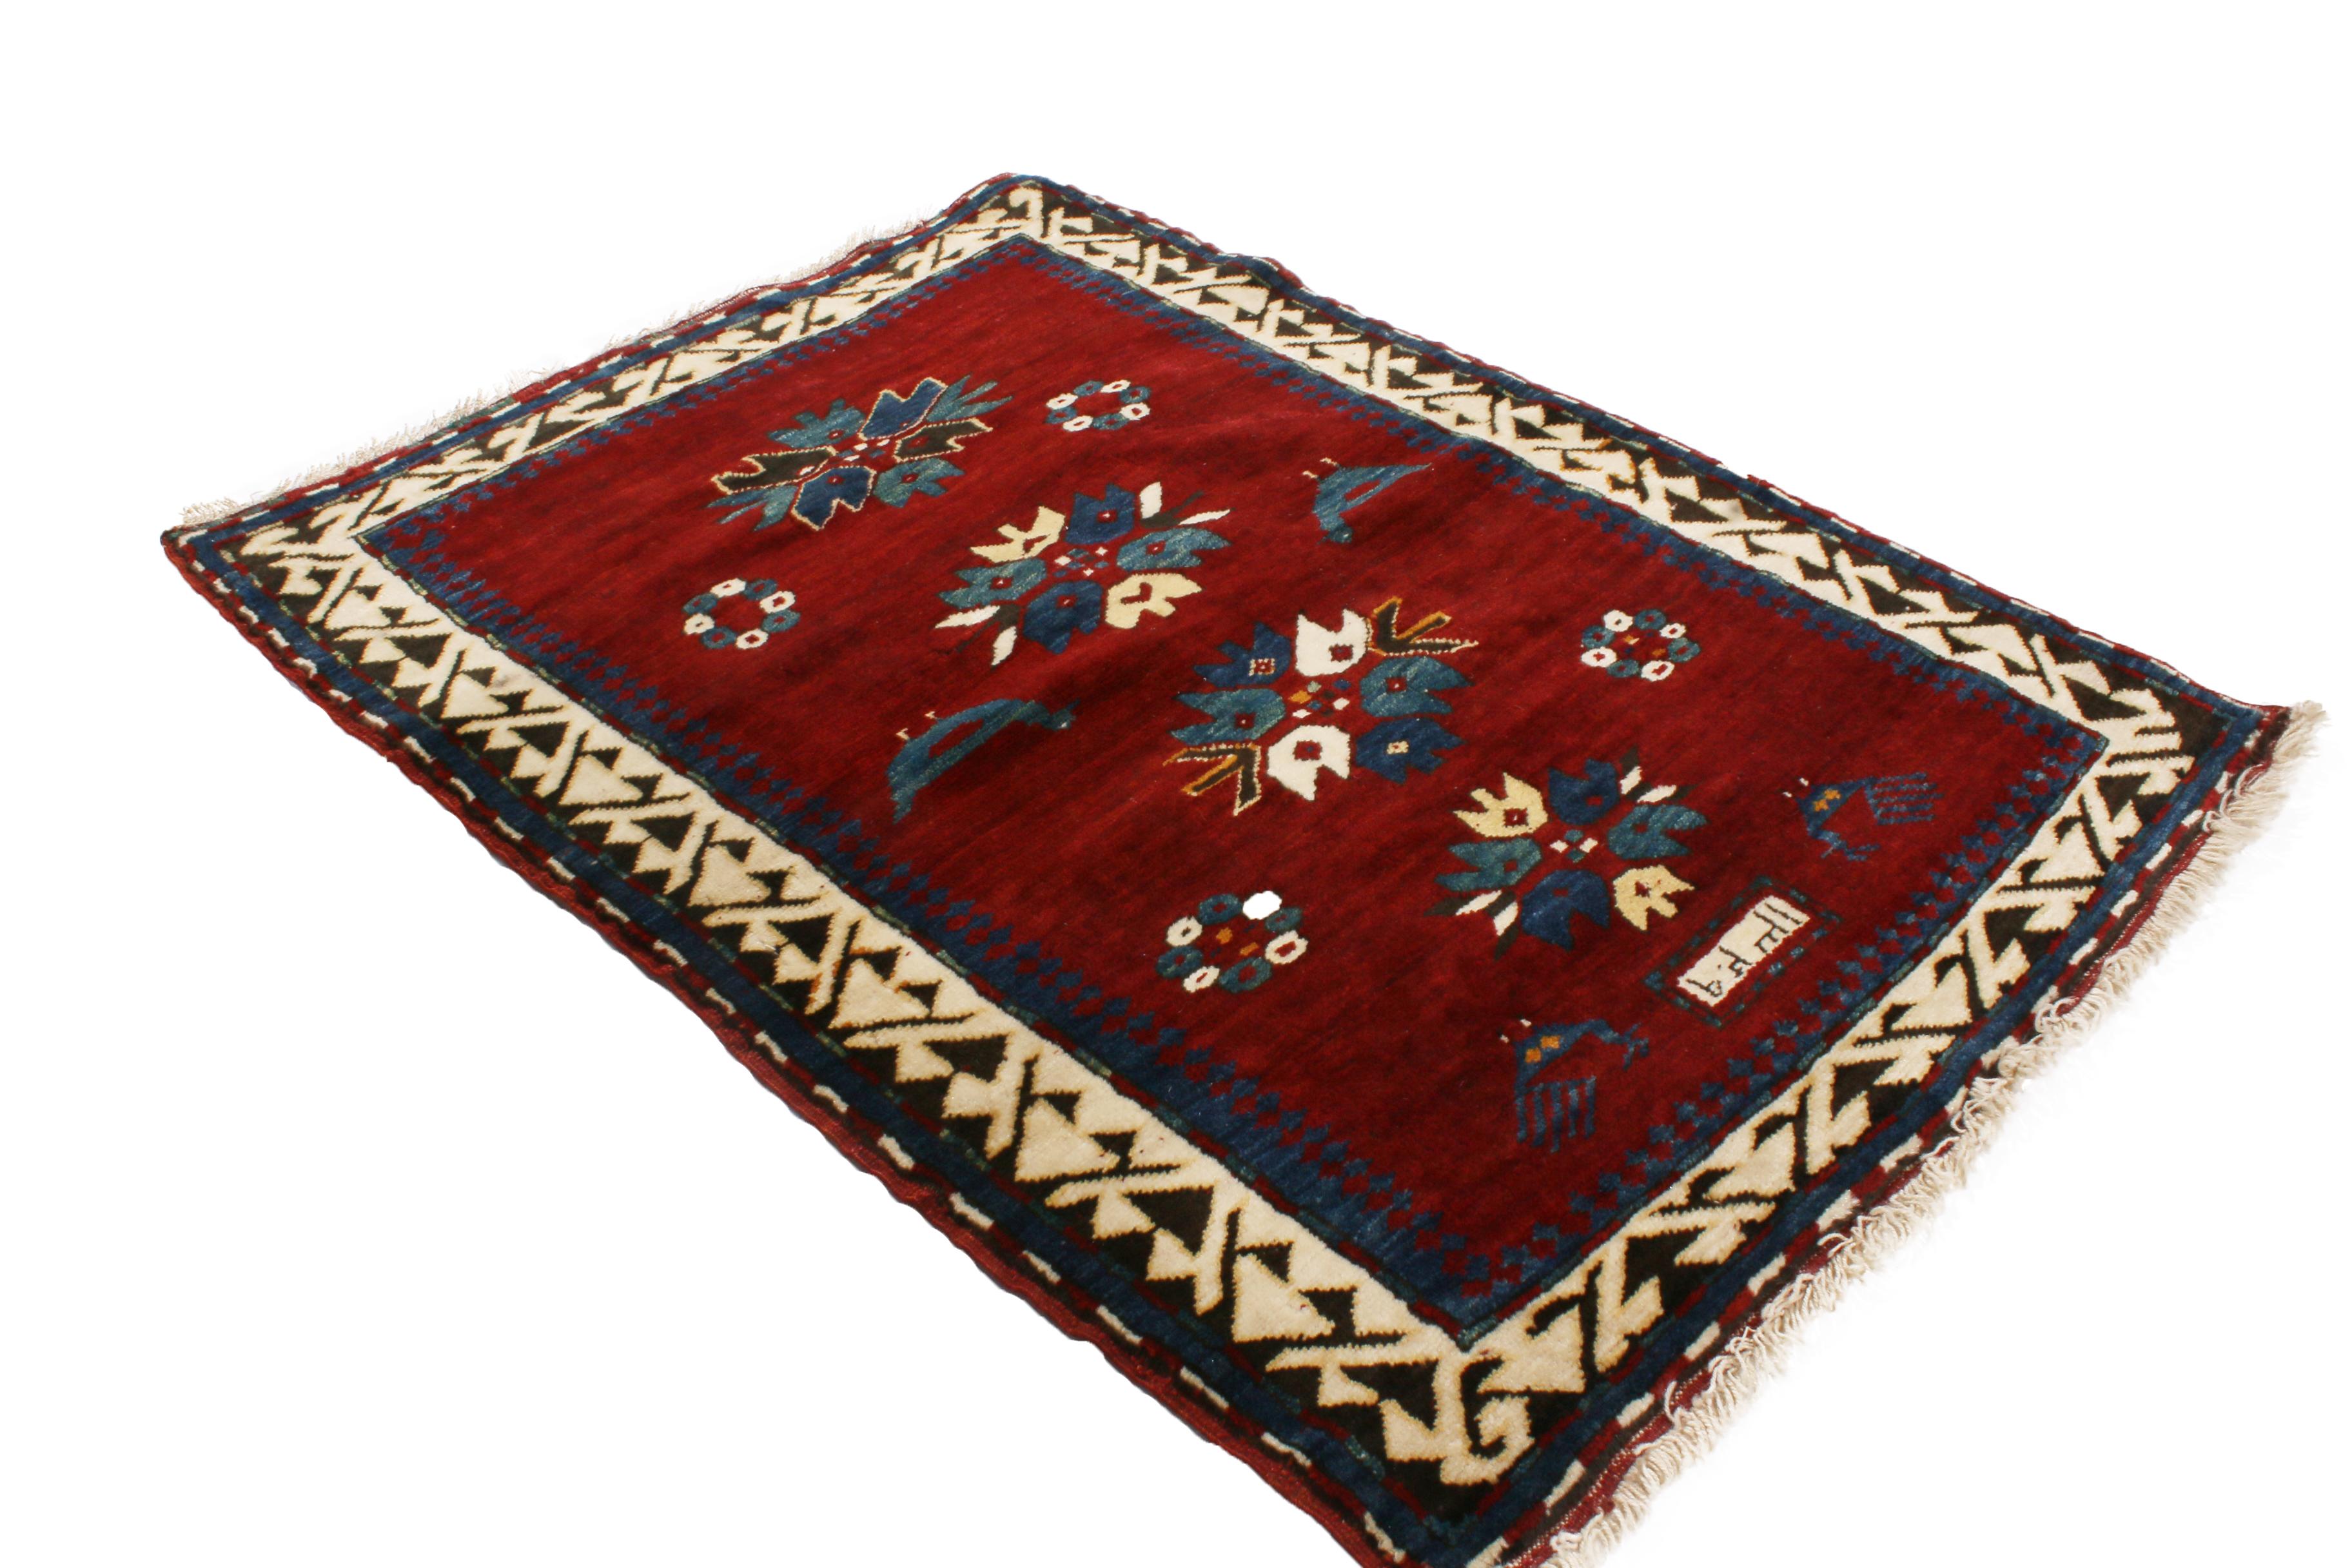 Hand-Knotted Antique Kazak Red and Royal Blue Wool Rug